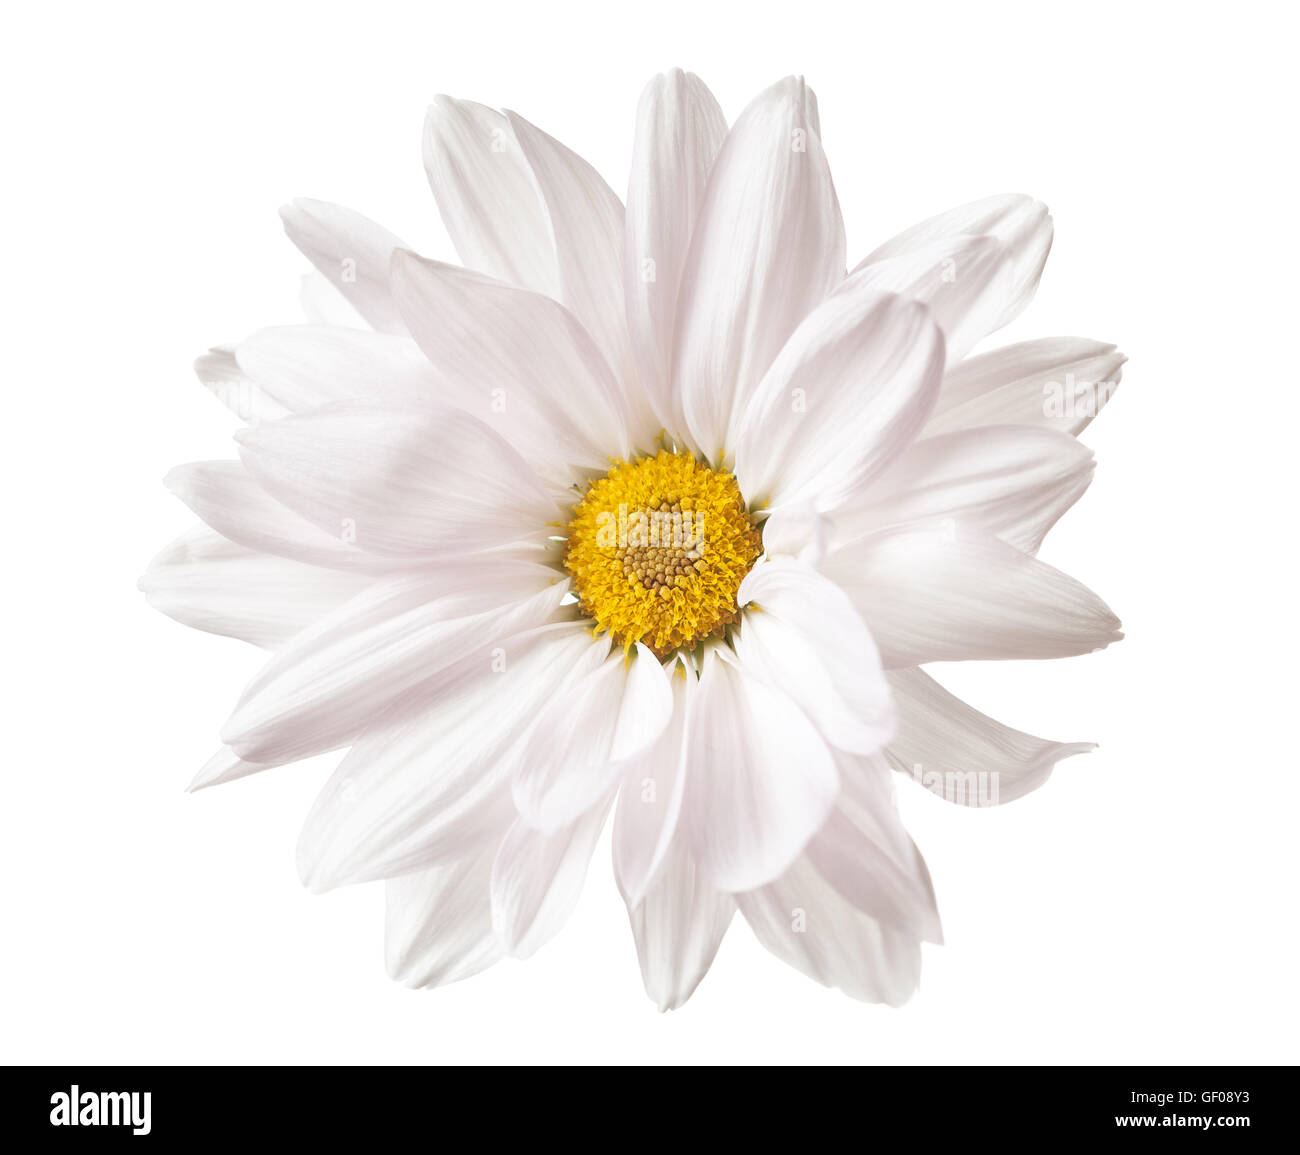 Daisy Flower White Yellow Daisies Blossom Floral Flowers Isolated Stock Photo